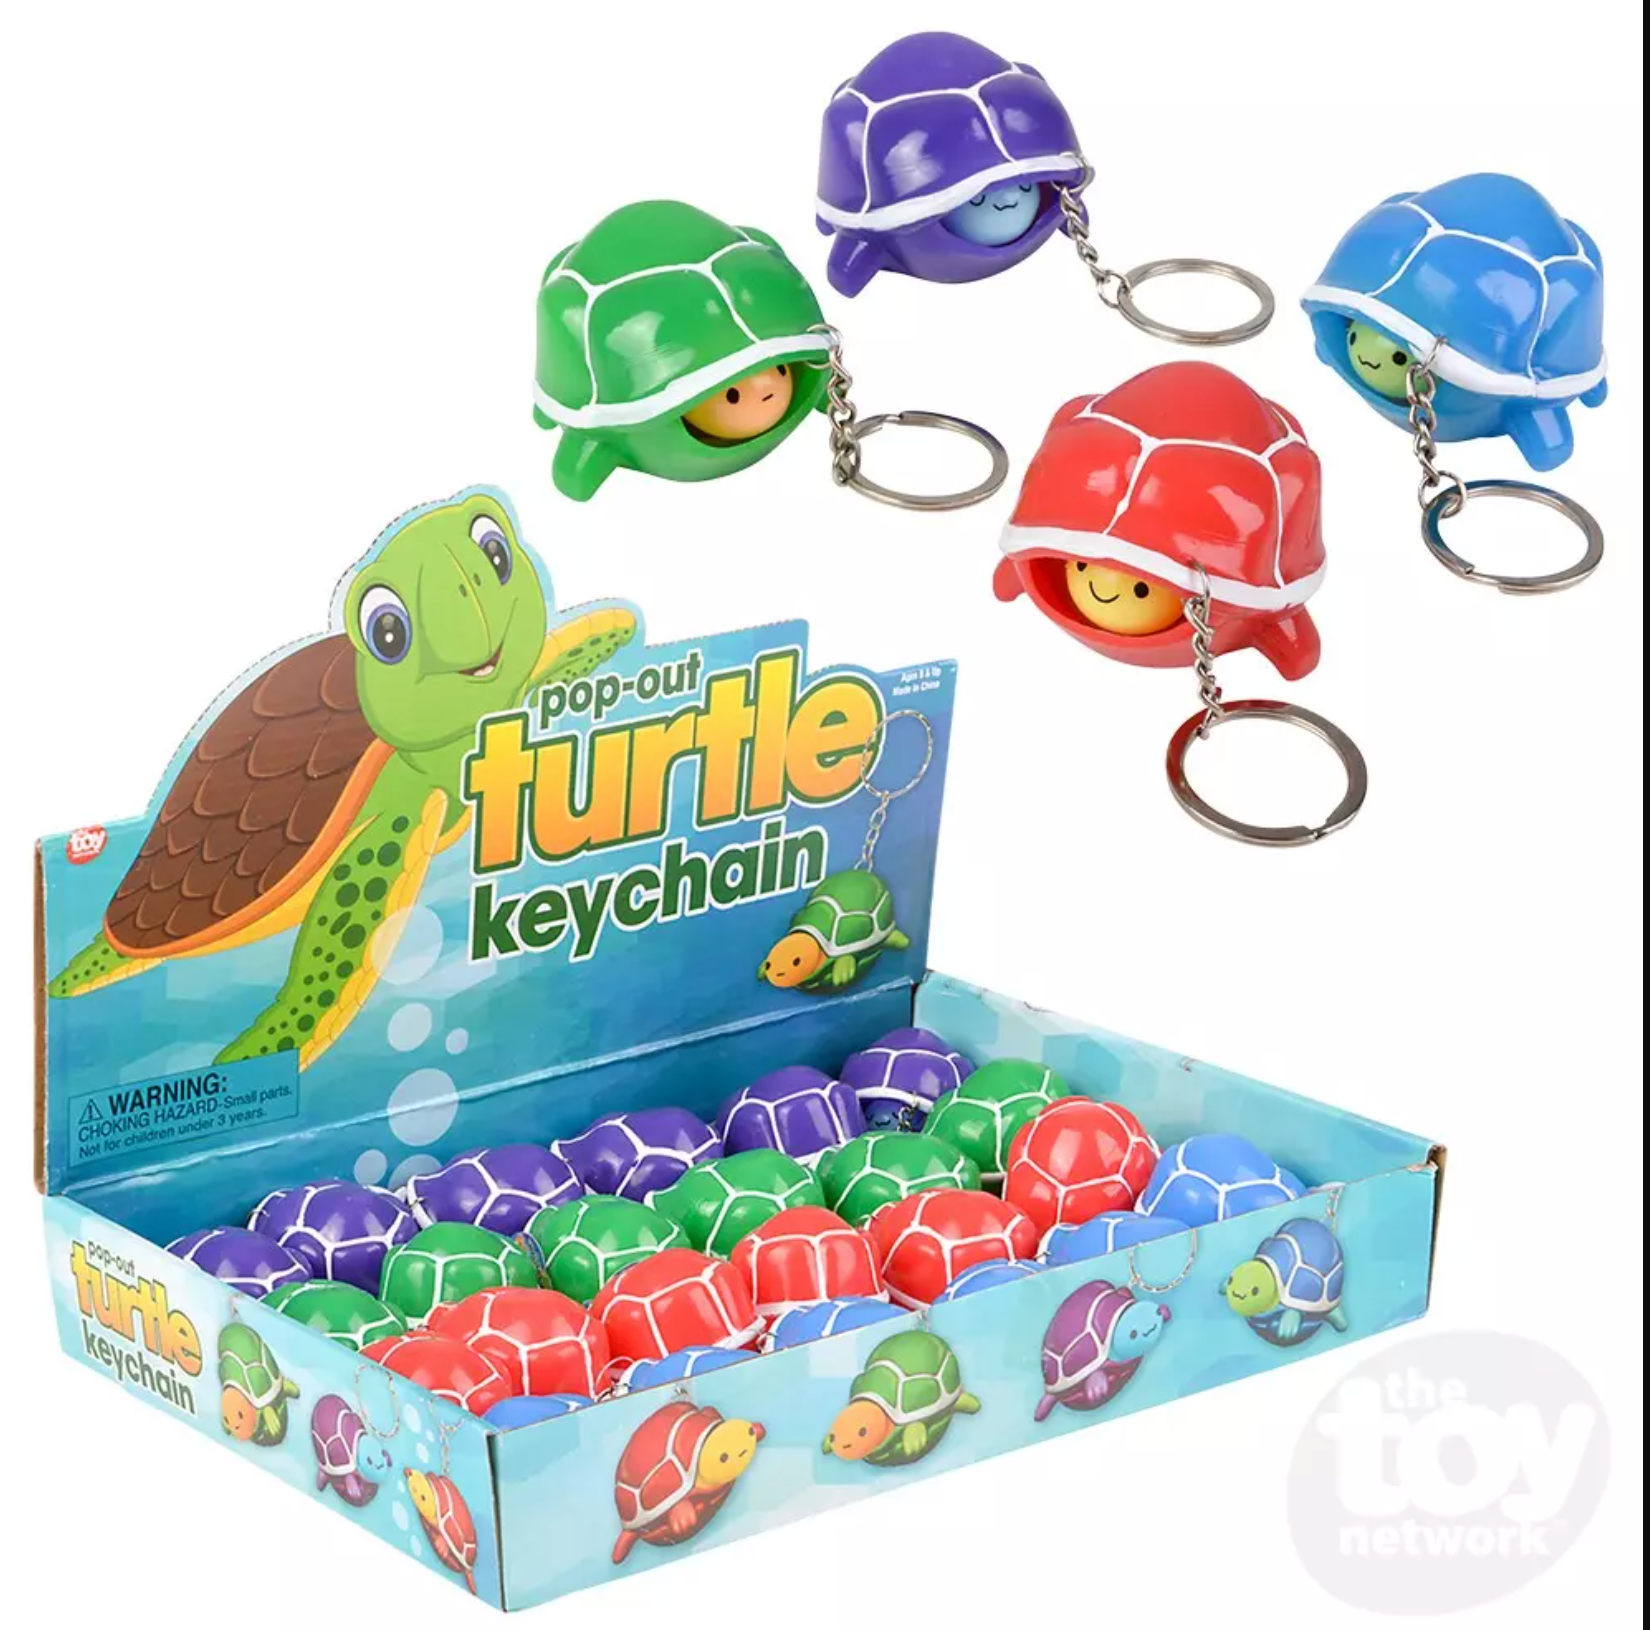 2" Pop Out Turtle Keychain-assorted colors - 1 per order